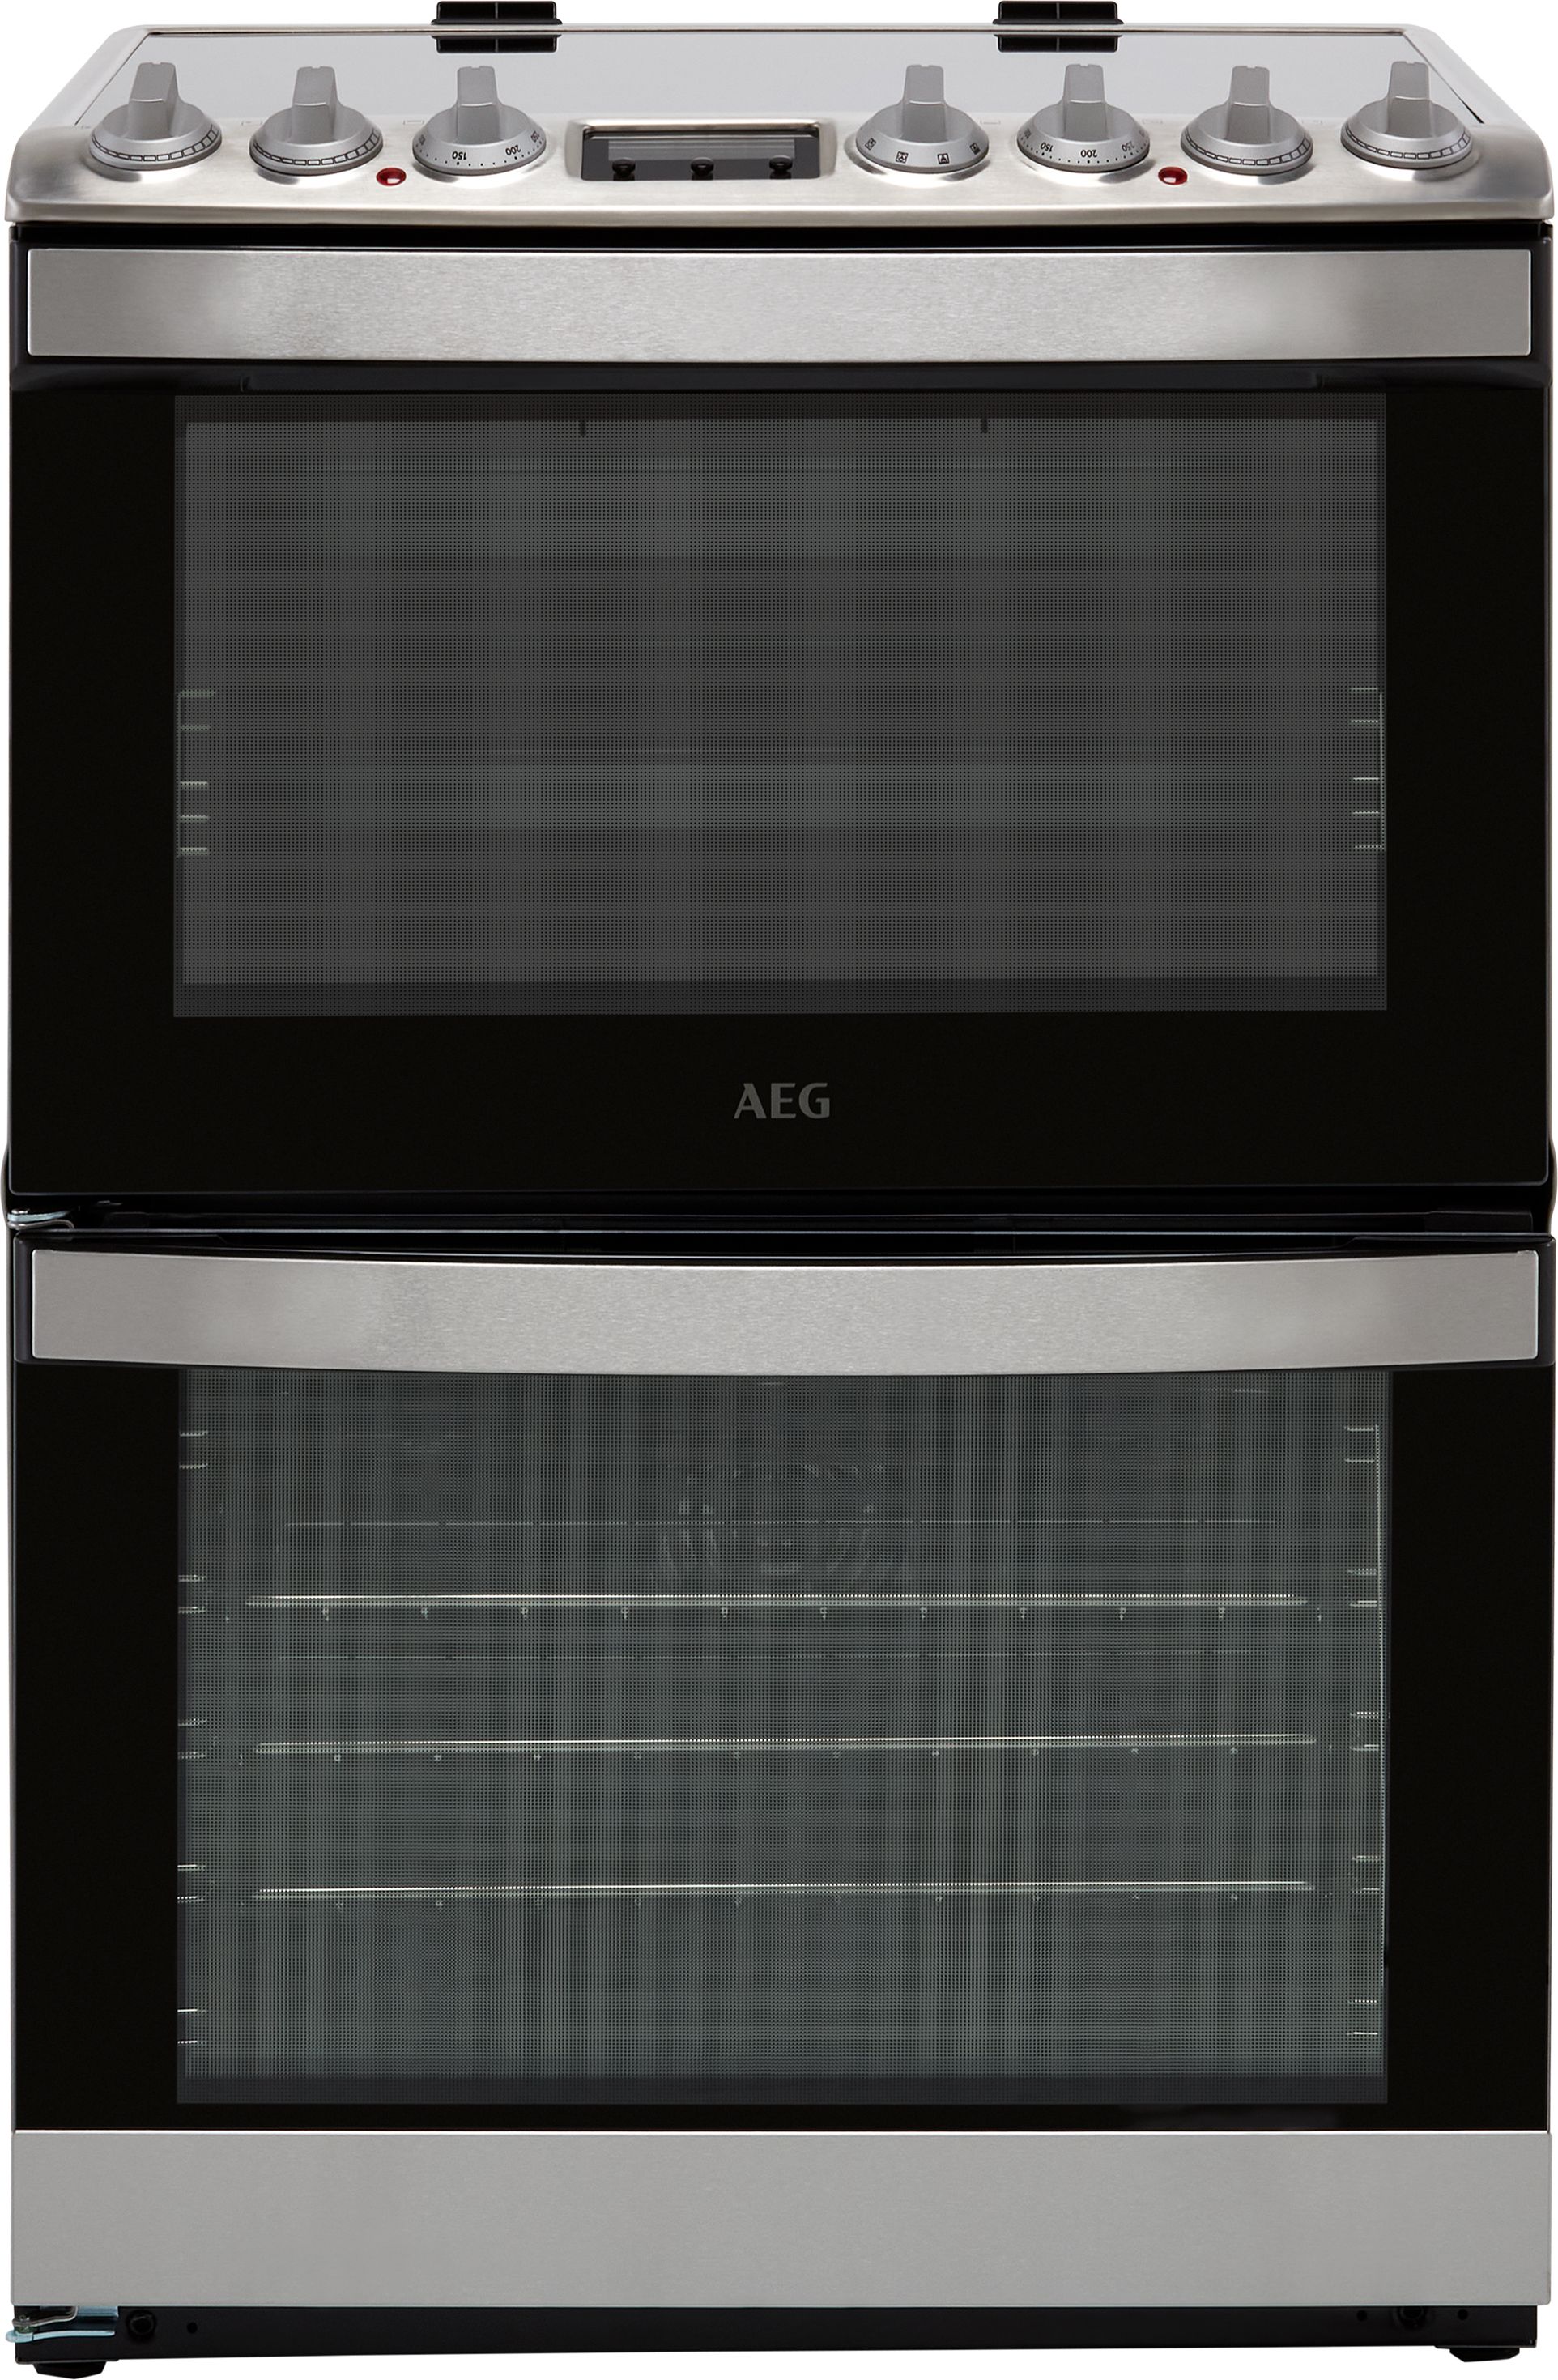 AEG CIB6742ACM 60cm Electric Cooker with Induction Hob - Stainless Steel - A/A Rated, Stainless Steel